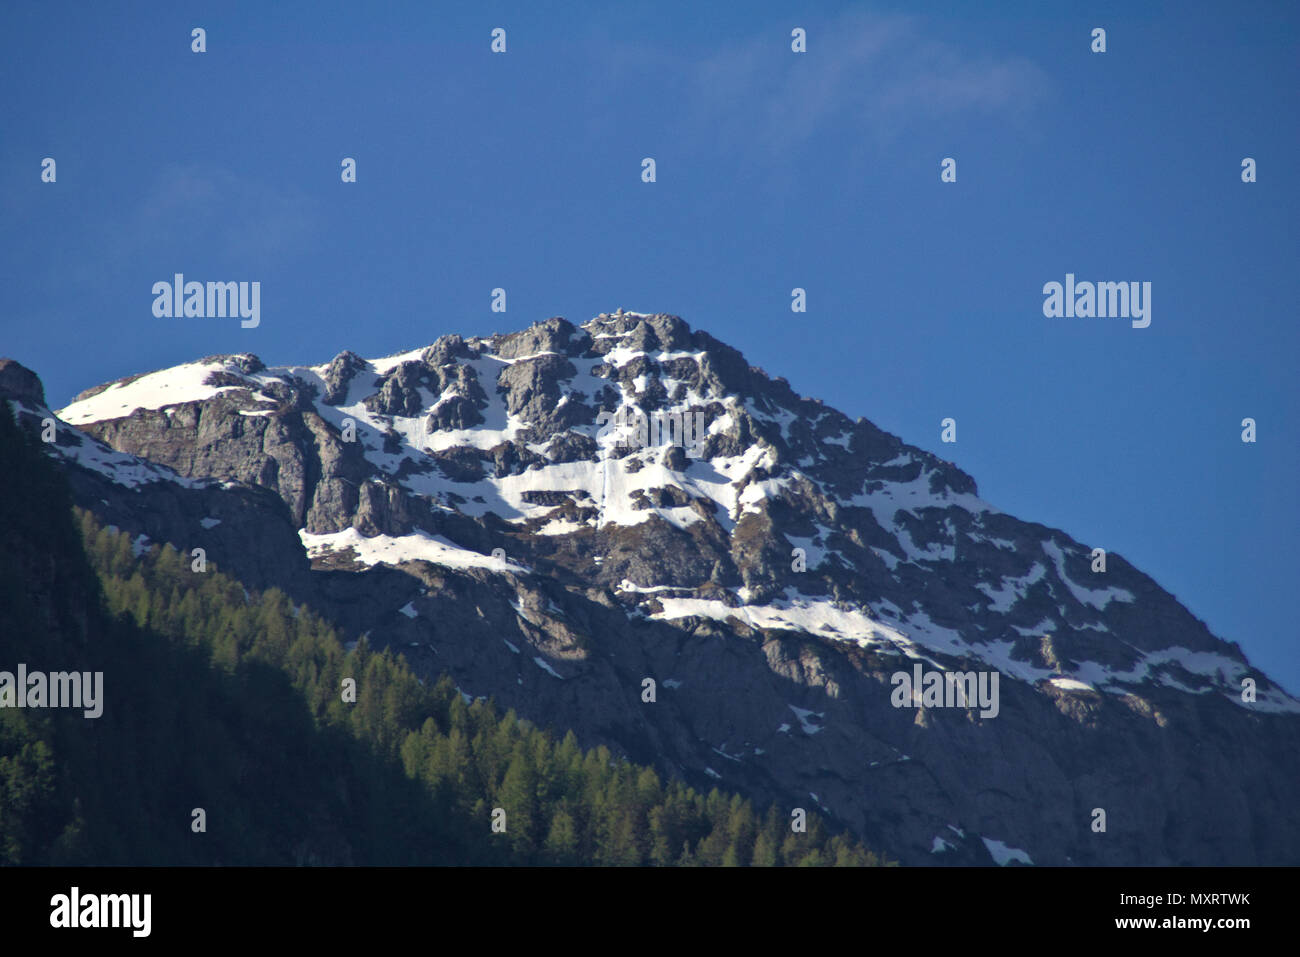 view of an alpine mountain landscape in the dolomites Stock Photo